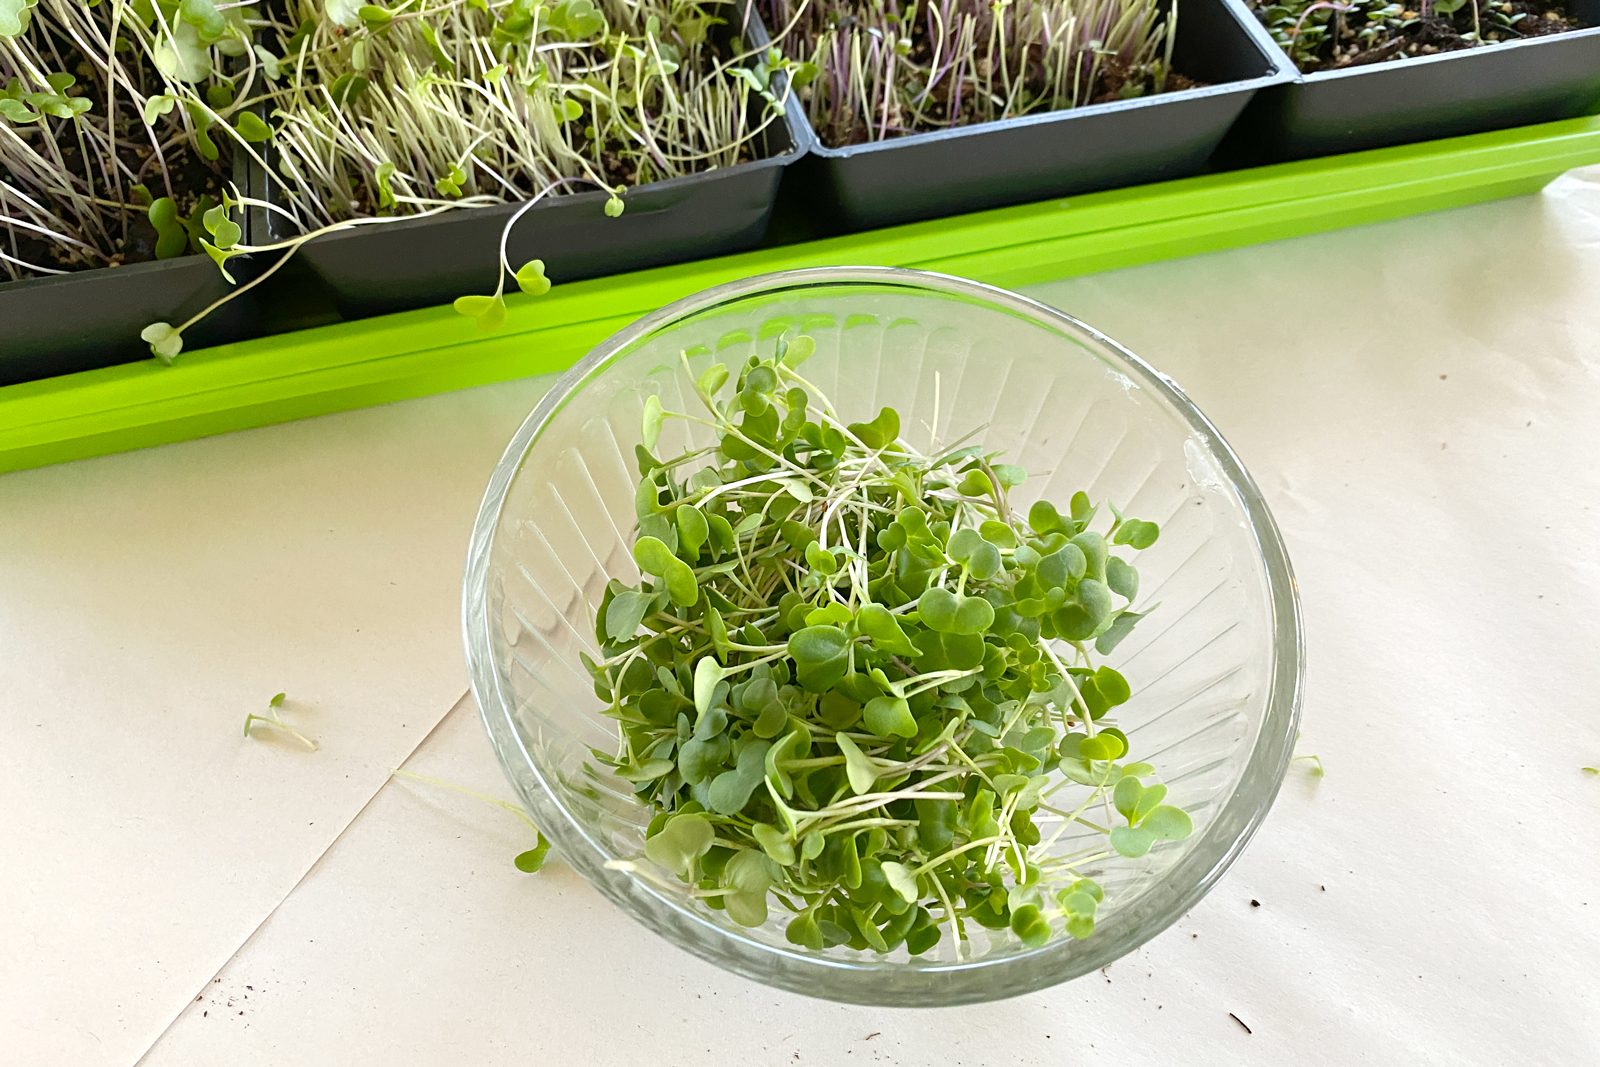 Small black scissor for cutting and harvesting sprouts and microgreens